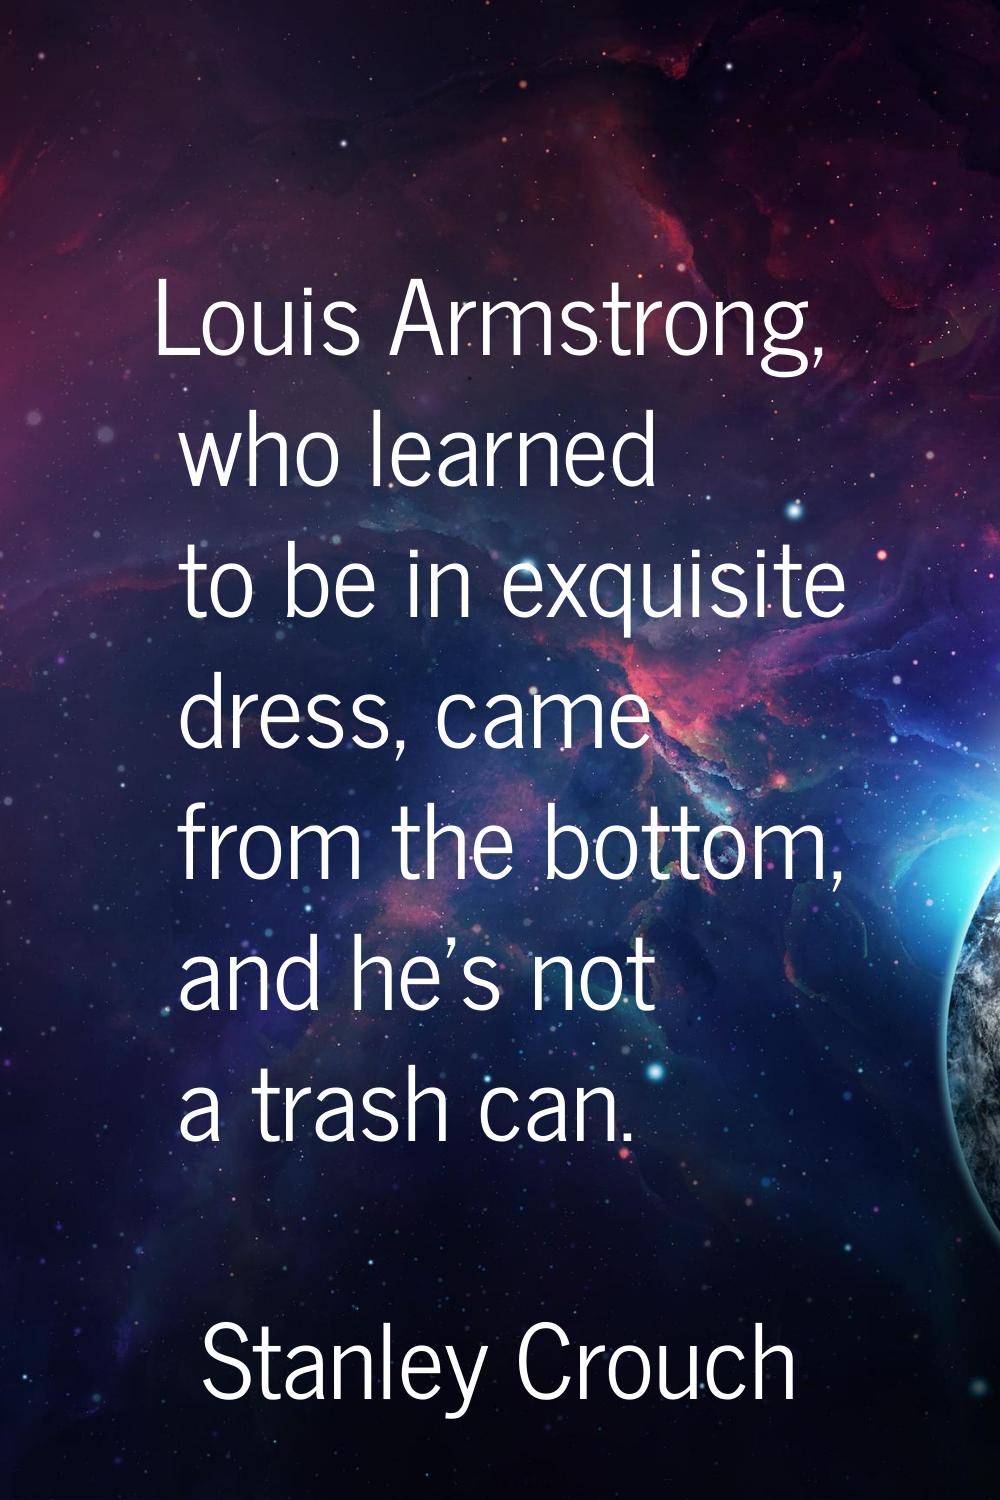 Louis Armstrong, who learned to be in exquisite dress, came from the bottom, and he's not a trash c